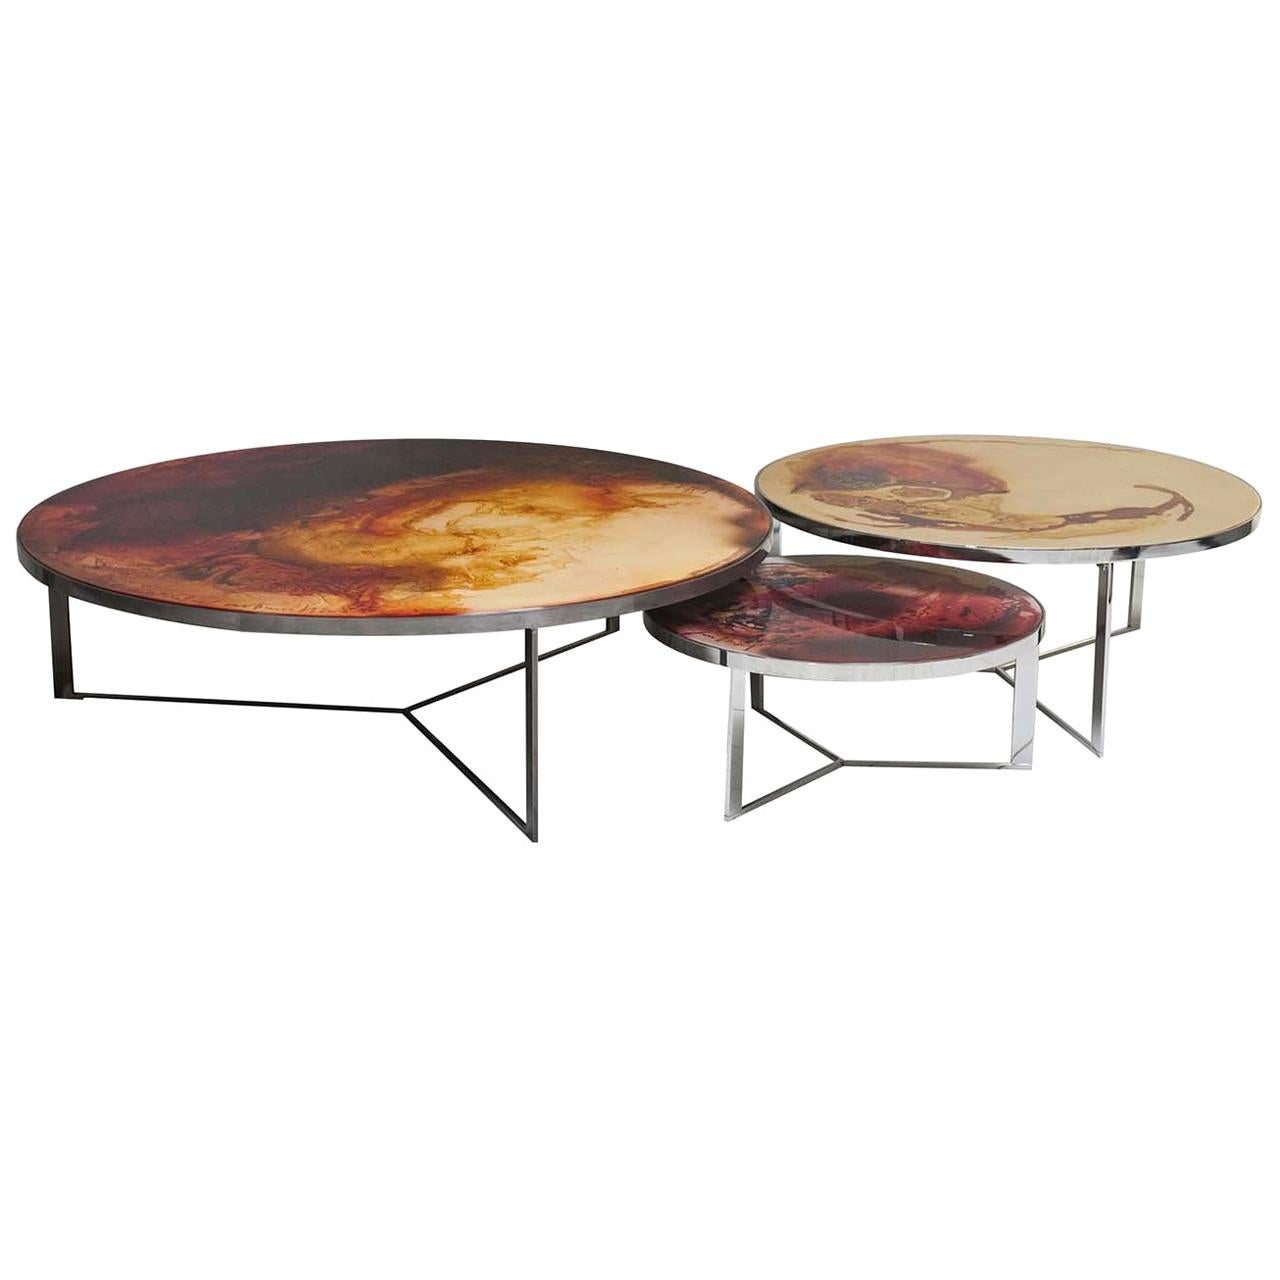 Set of 3 Hand Painted Rust Coffee Tables